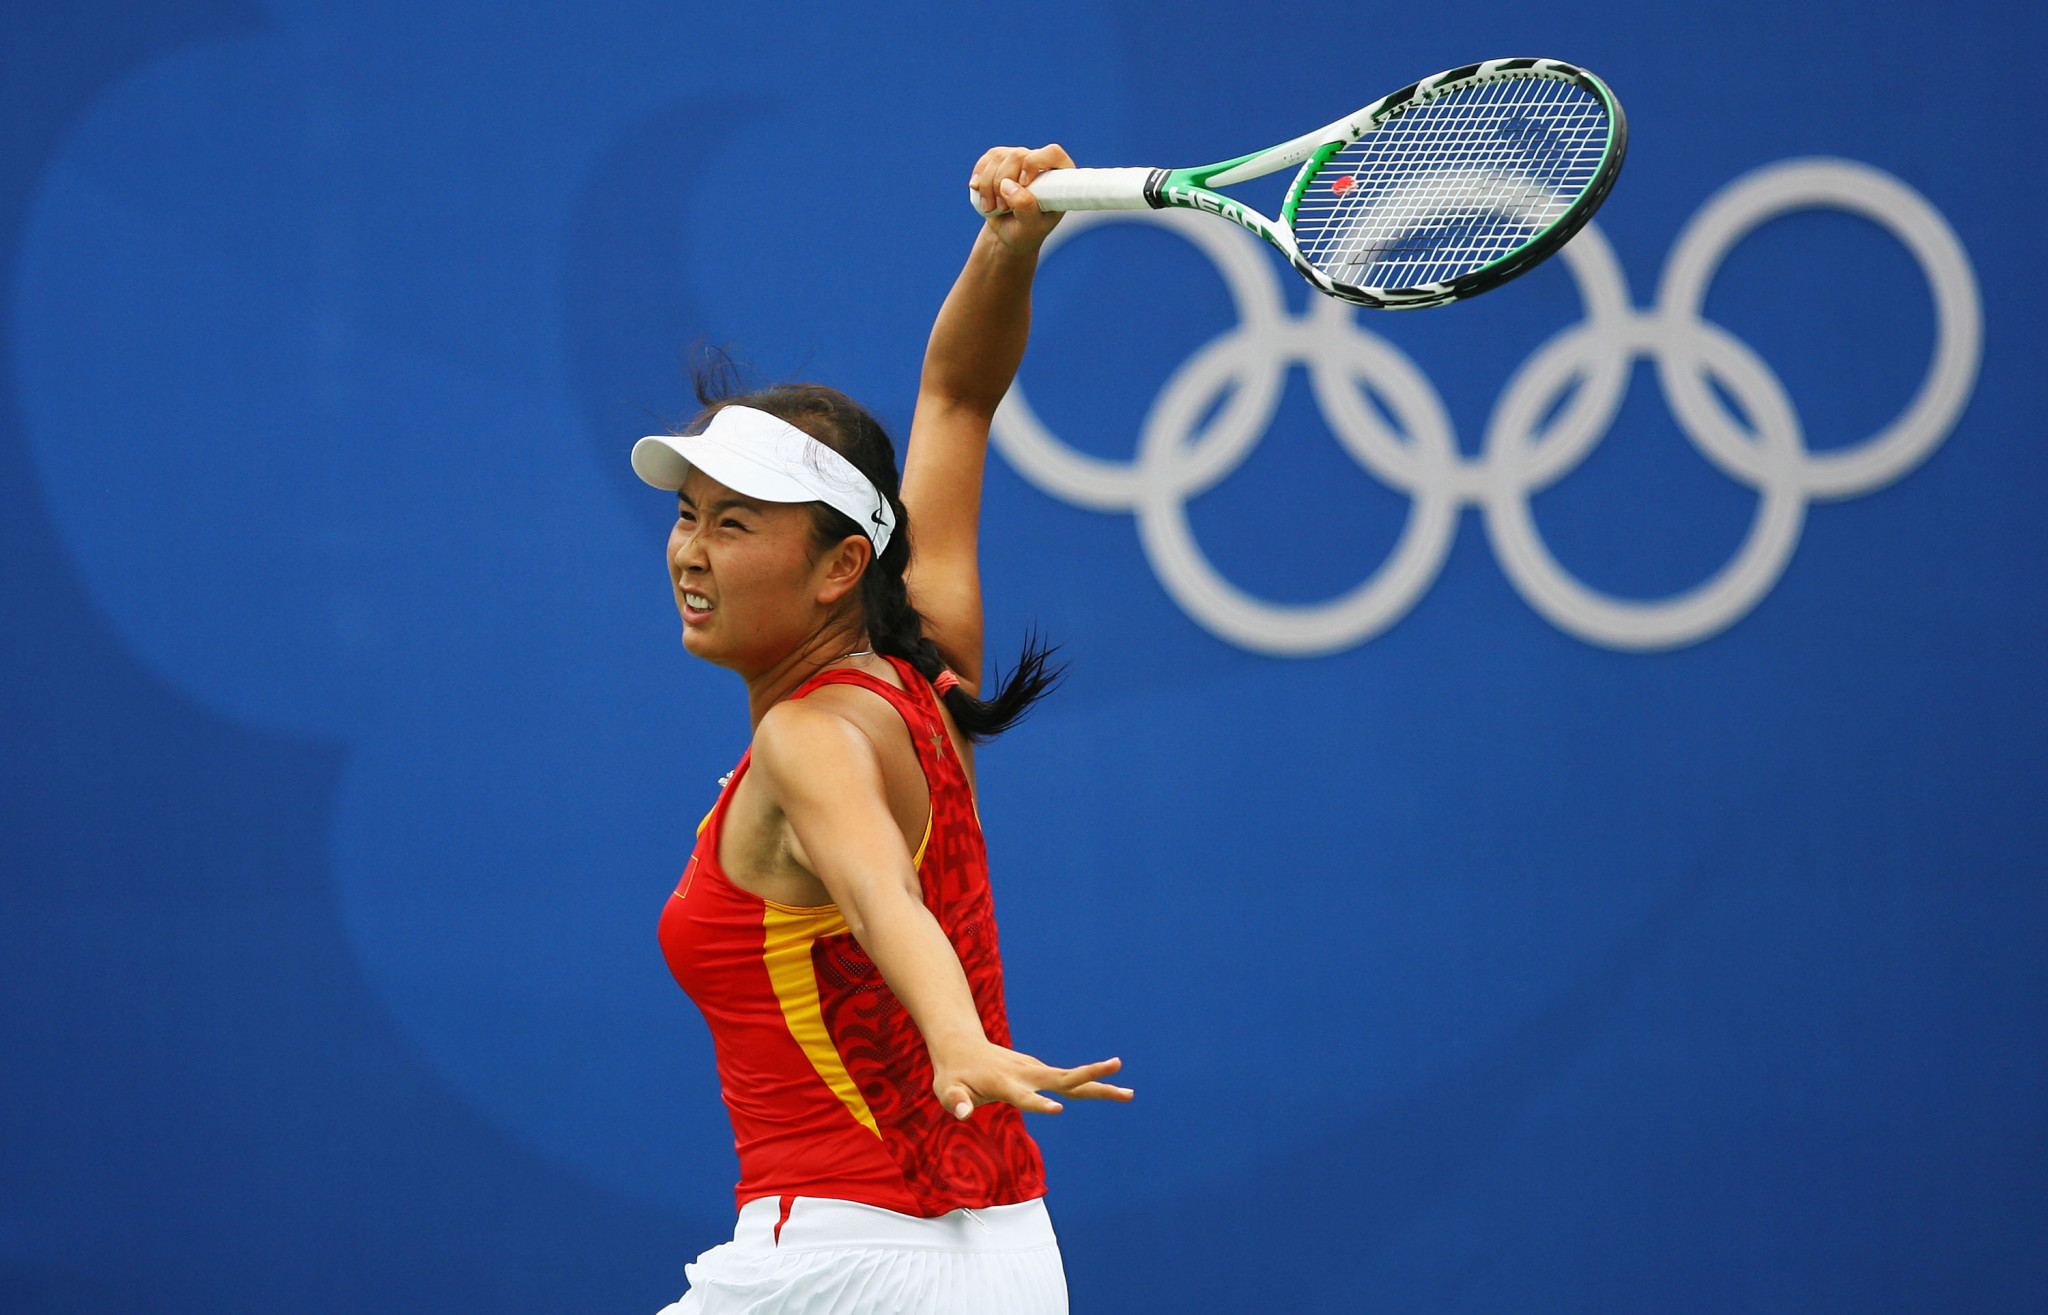 Peng Shuai appeared at three Olympic Games, and concerns remain over her well-being ©Getty Images